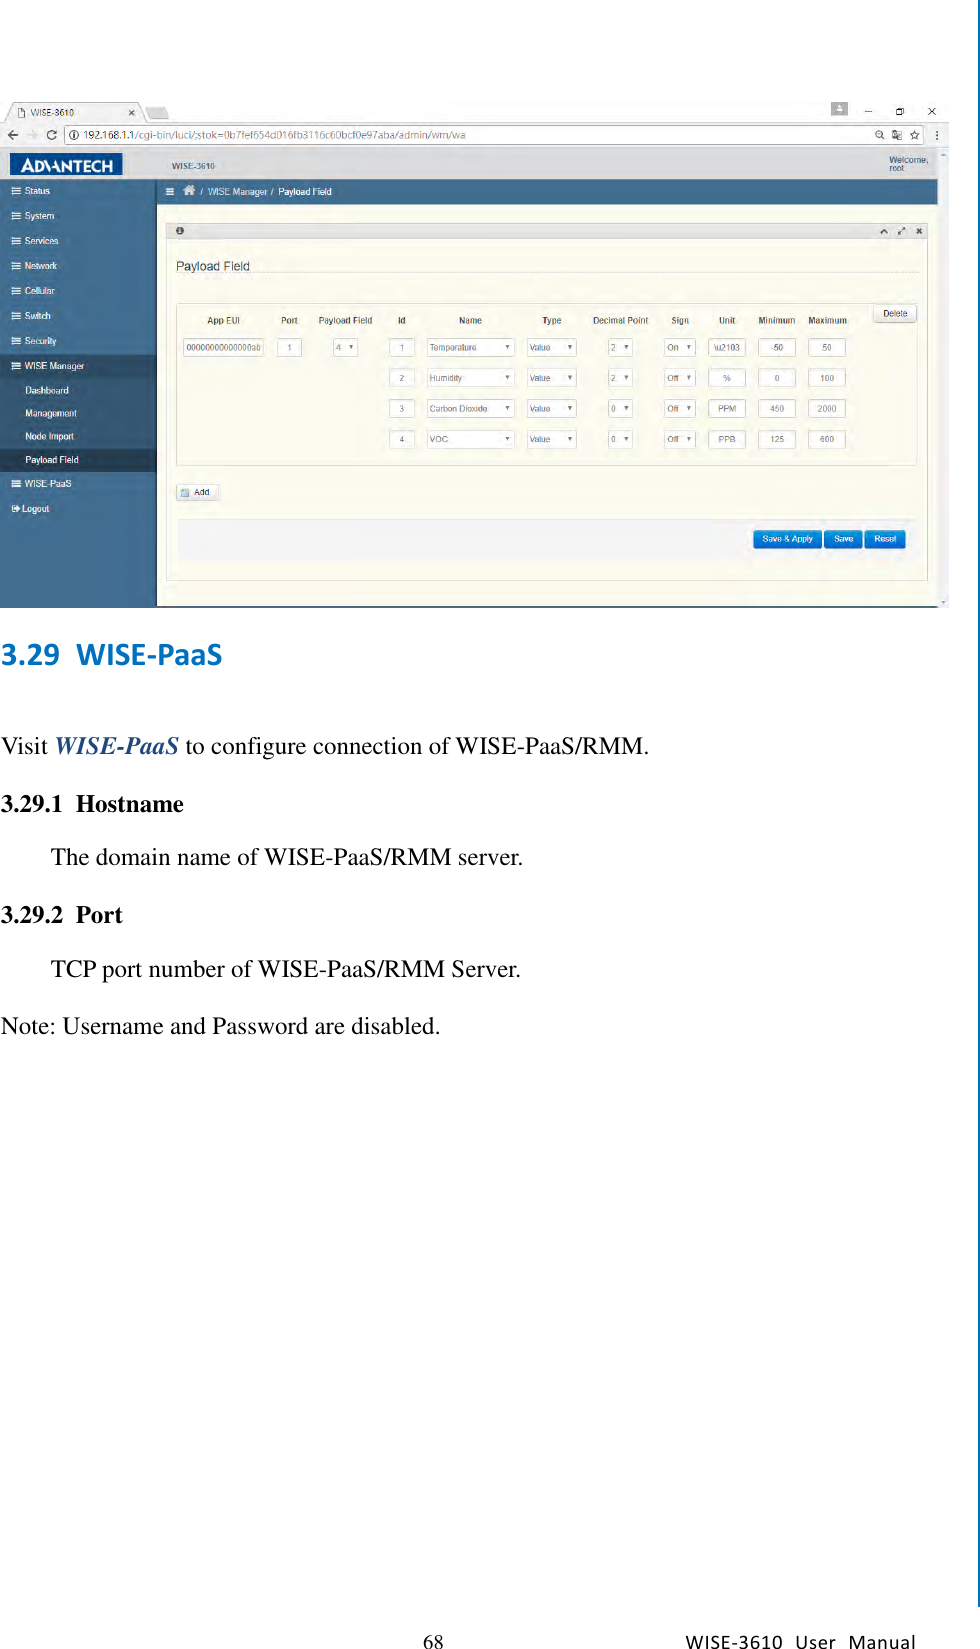   68 WISE-3610  User  Manual  Chapter5    Advantech Services  3.29 WISE-PaaS  Visit WISE-PaaS to configure connection of WISE-PaaS/RMM.  3.29.1 Hostname The domain name of WISE-PaaS/RMM server.  3.29.2 Port TCP port number of WISE-PaaS/RMM Server.  Note: Username and Password are disabled.                   